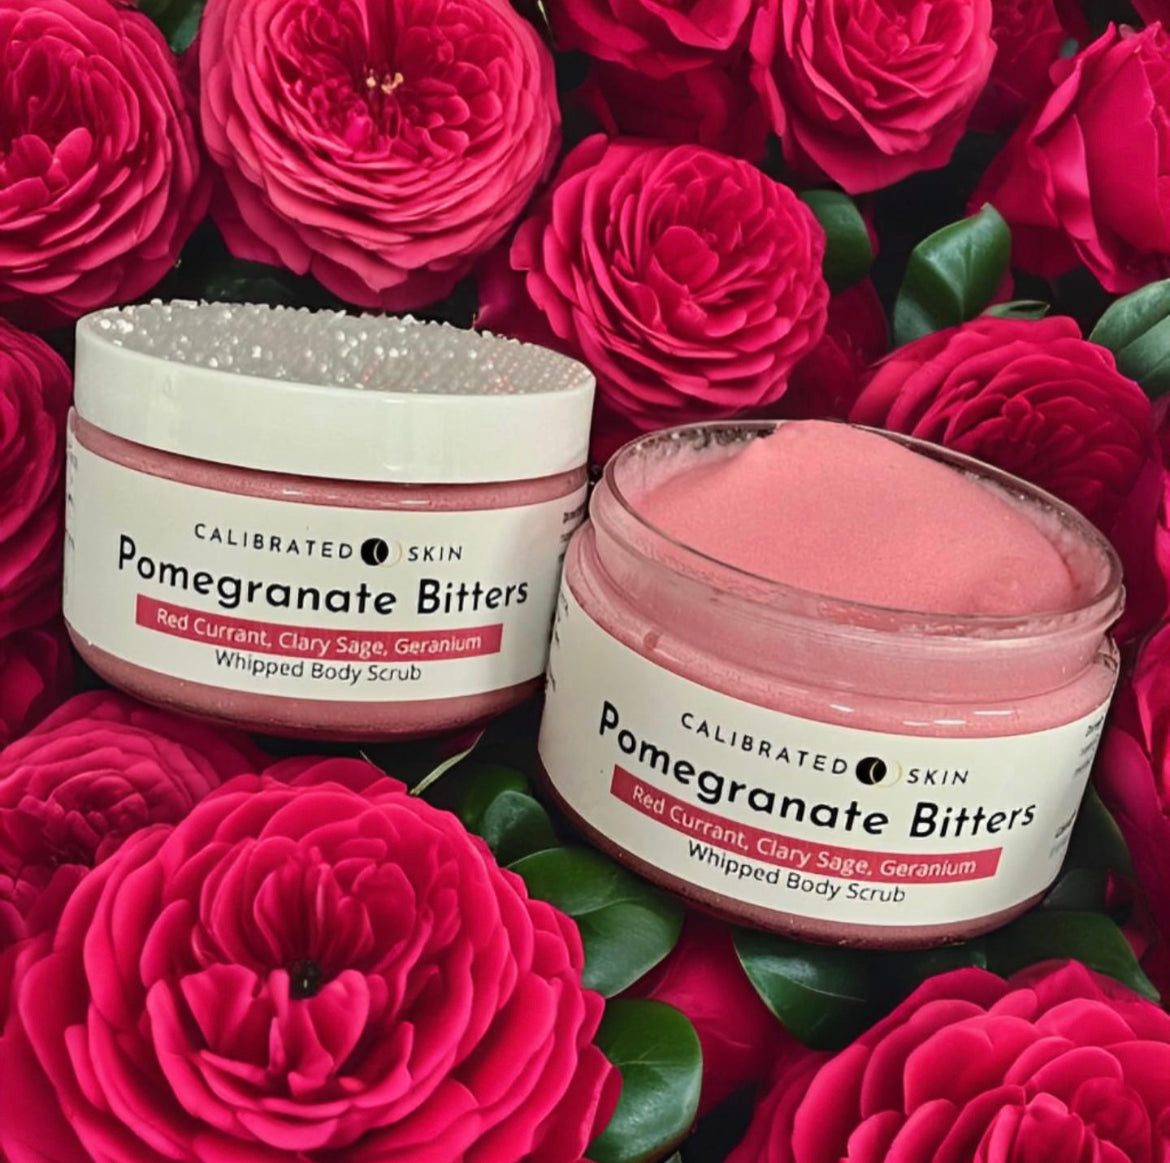 Pomegranate Bitters Whipped Body Scrub (pomegranate, citrus, red currant)